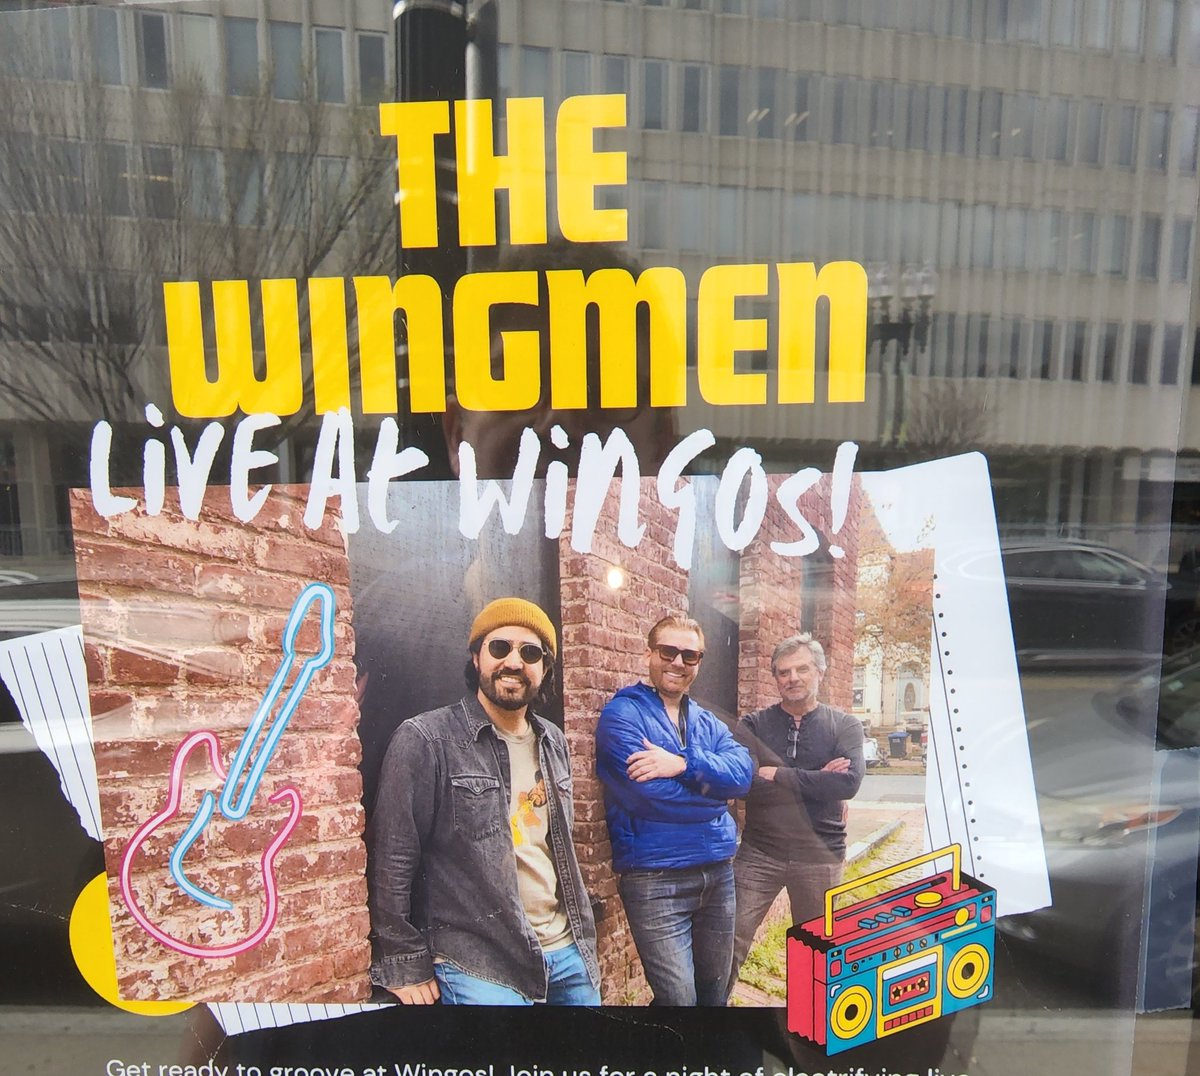 🎶 Live music at Wingos Gloverpark starts at 7pm! 🕖 No cover, so come early and grab a great seat! 🪑 Why go far downtown when it's right in your backyard? 🏡 #LiveMusic #LocalMusic #eventbrite #SupportLocalArtists #MusicLovers #GoodVibes #CommunityEvent